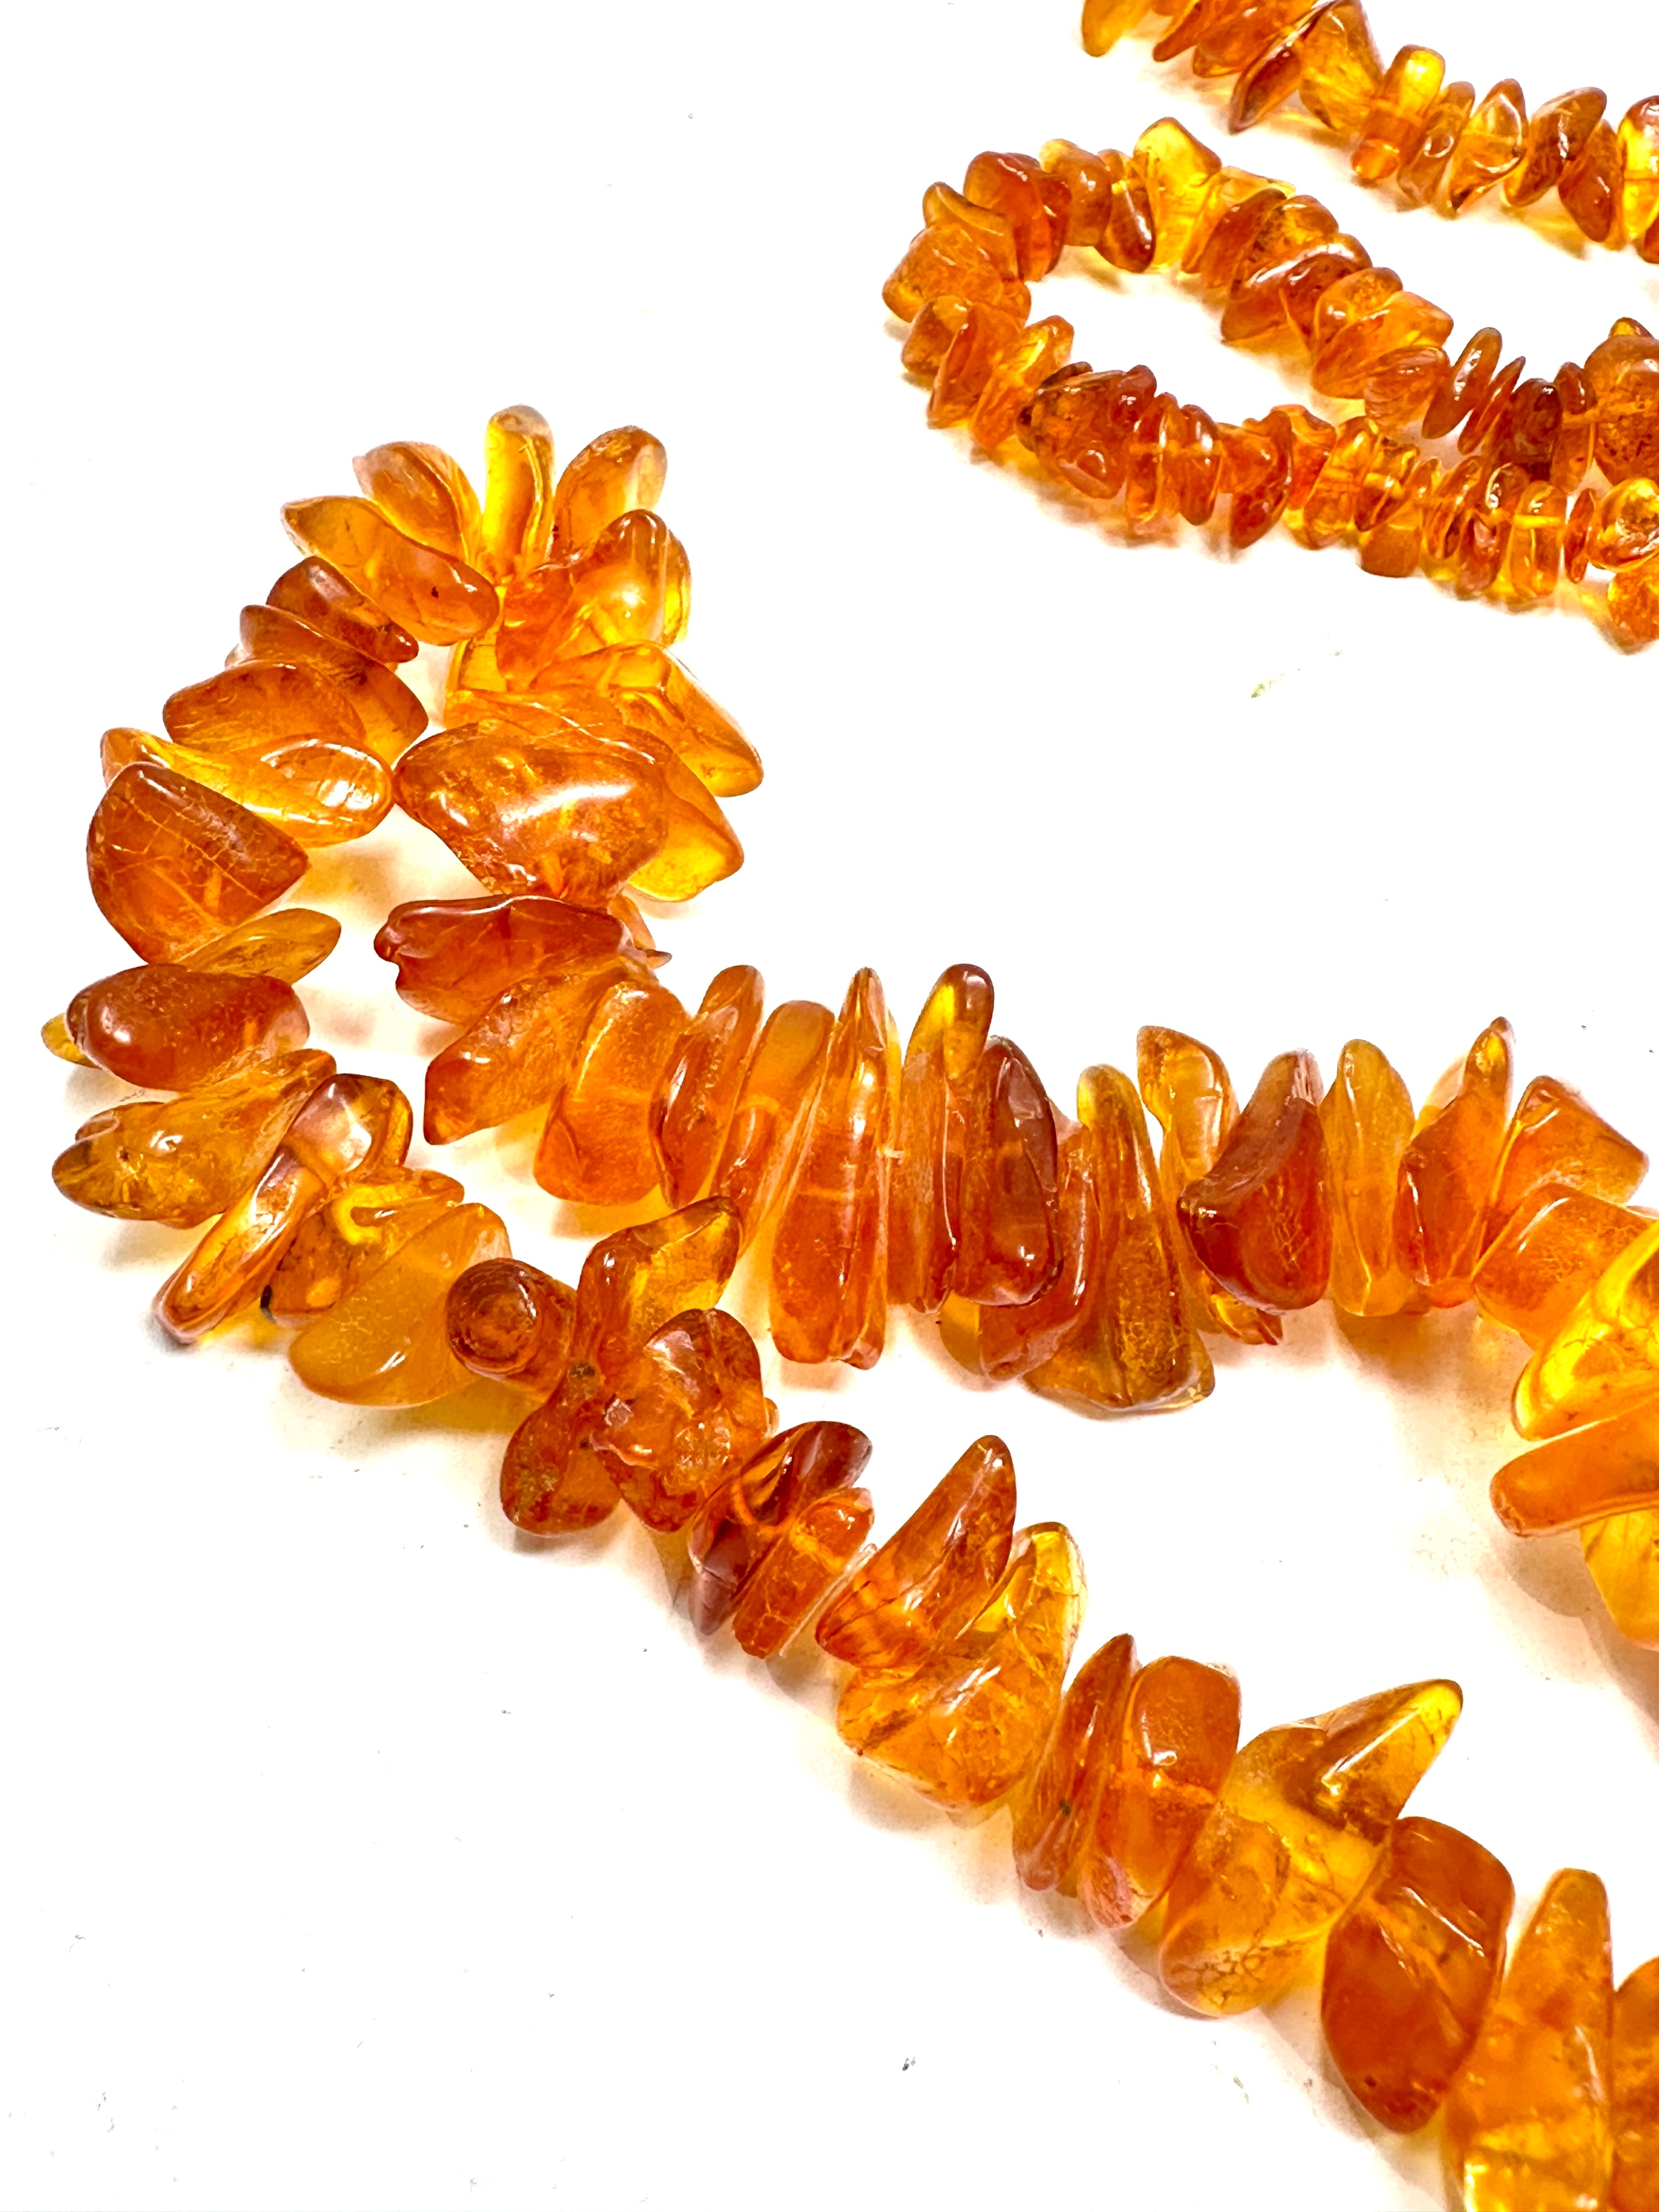 Amber jewellery necklaces weight 159g - Image 4 of 6